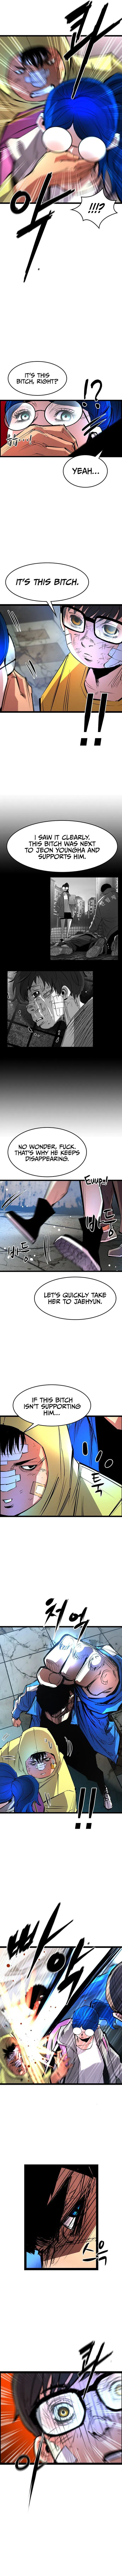 Hanlim Gym Chapter 65 page 9